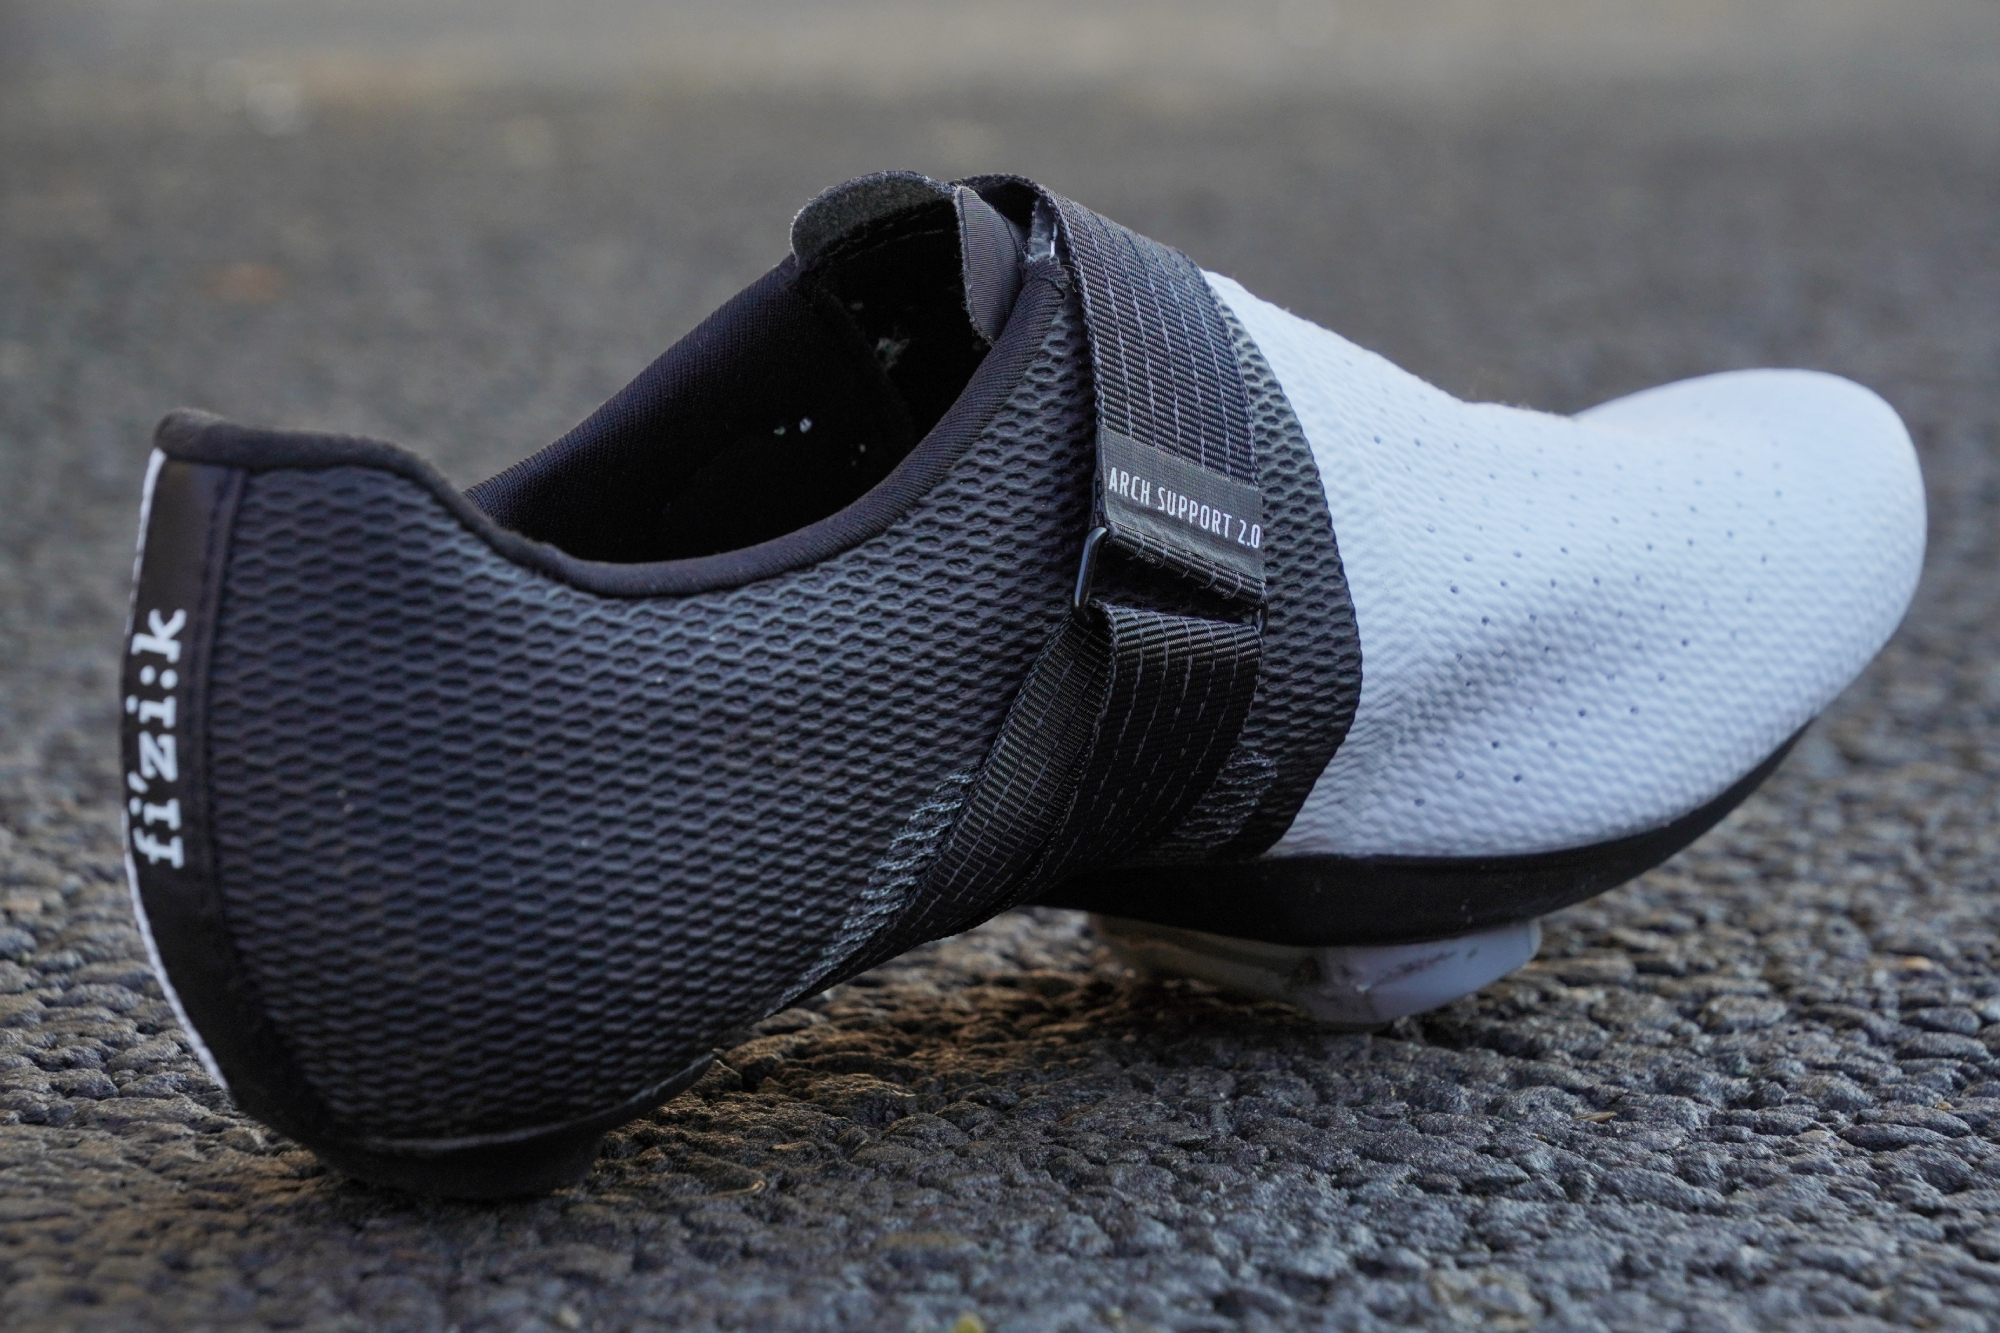 Arch support of the Fizik Vento Stabilita Carbons